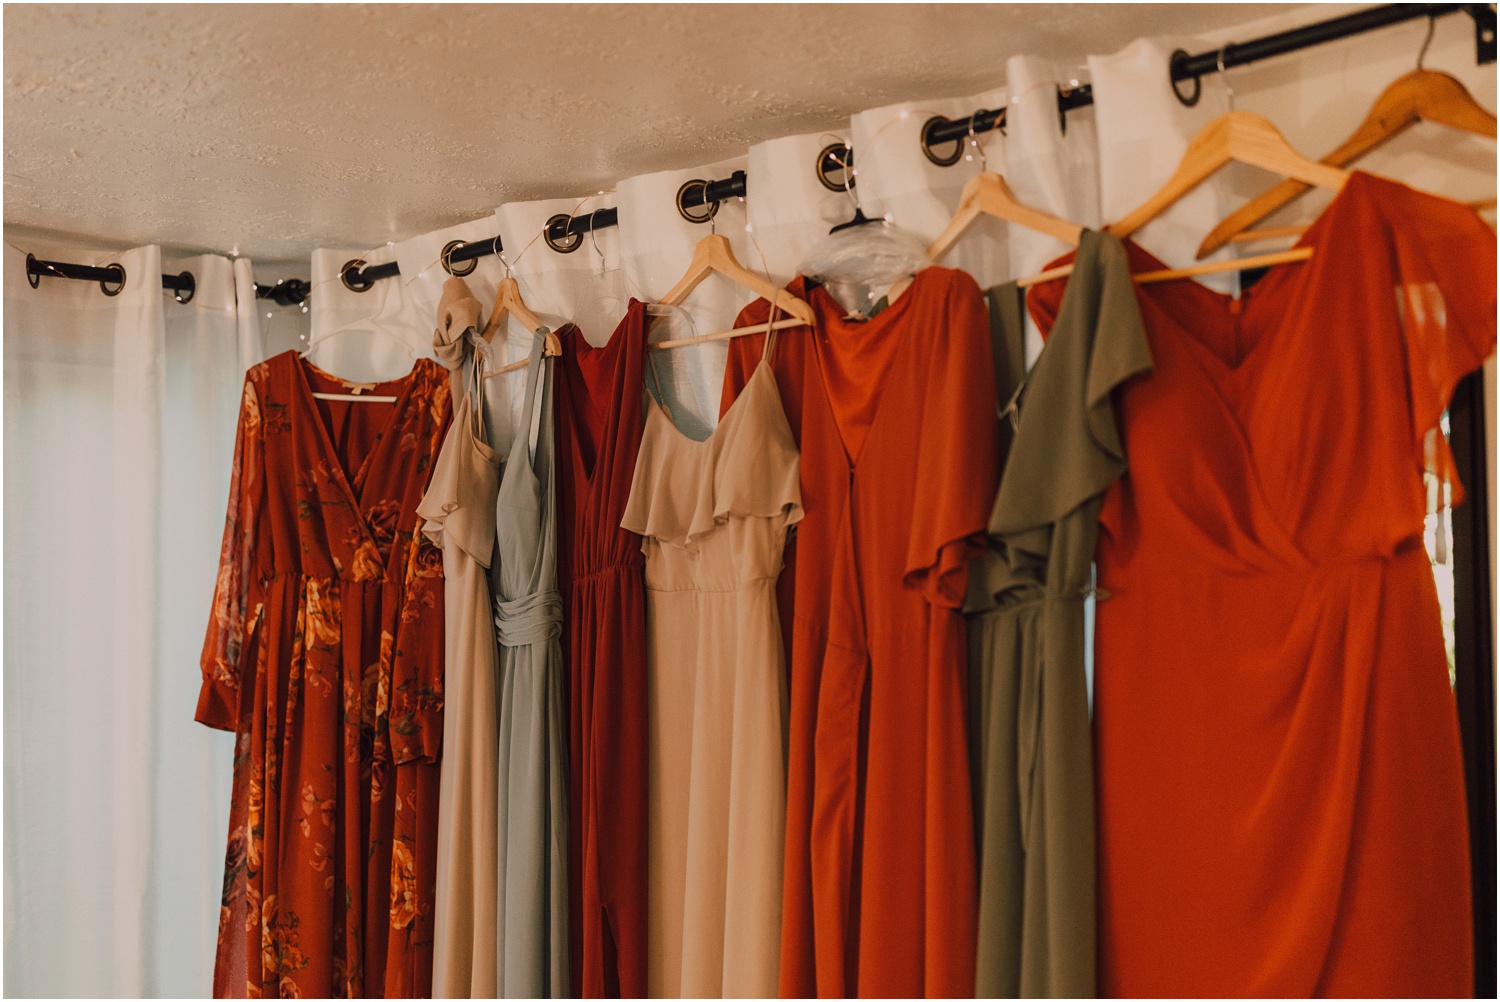 Bridesmaid dresses with warm, fall tones